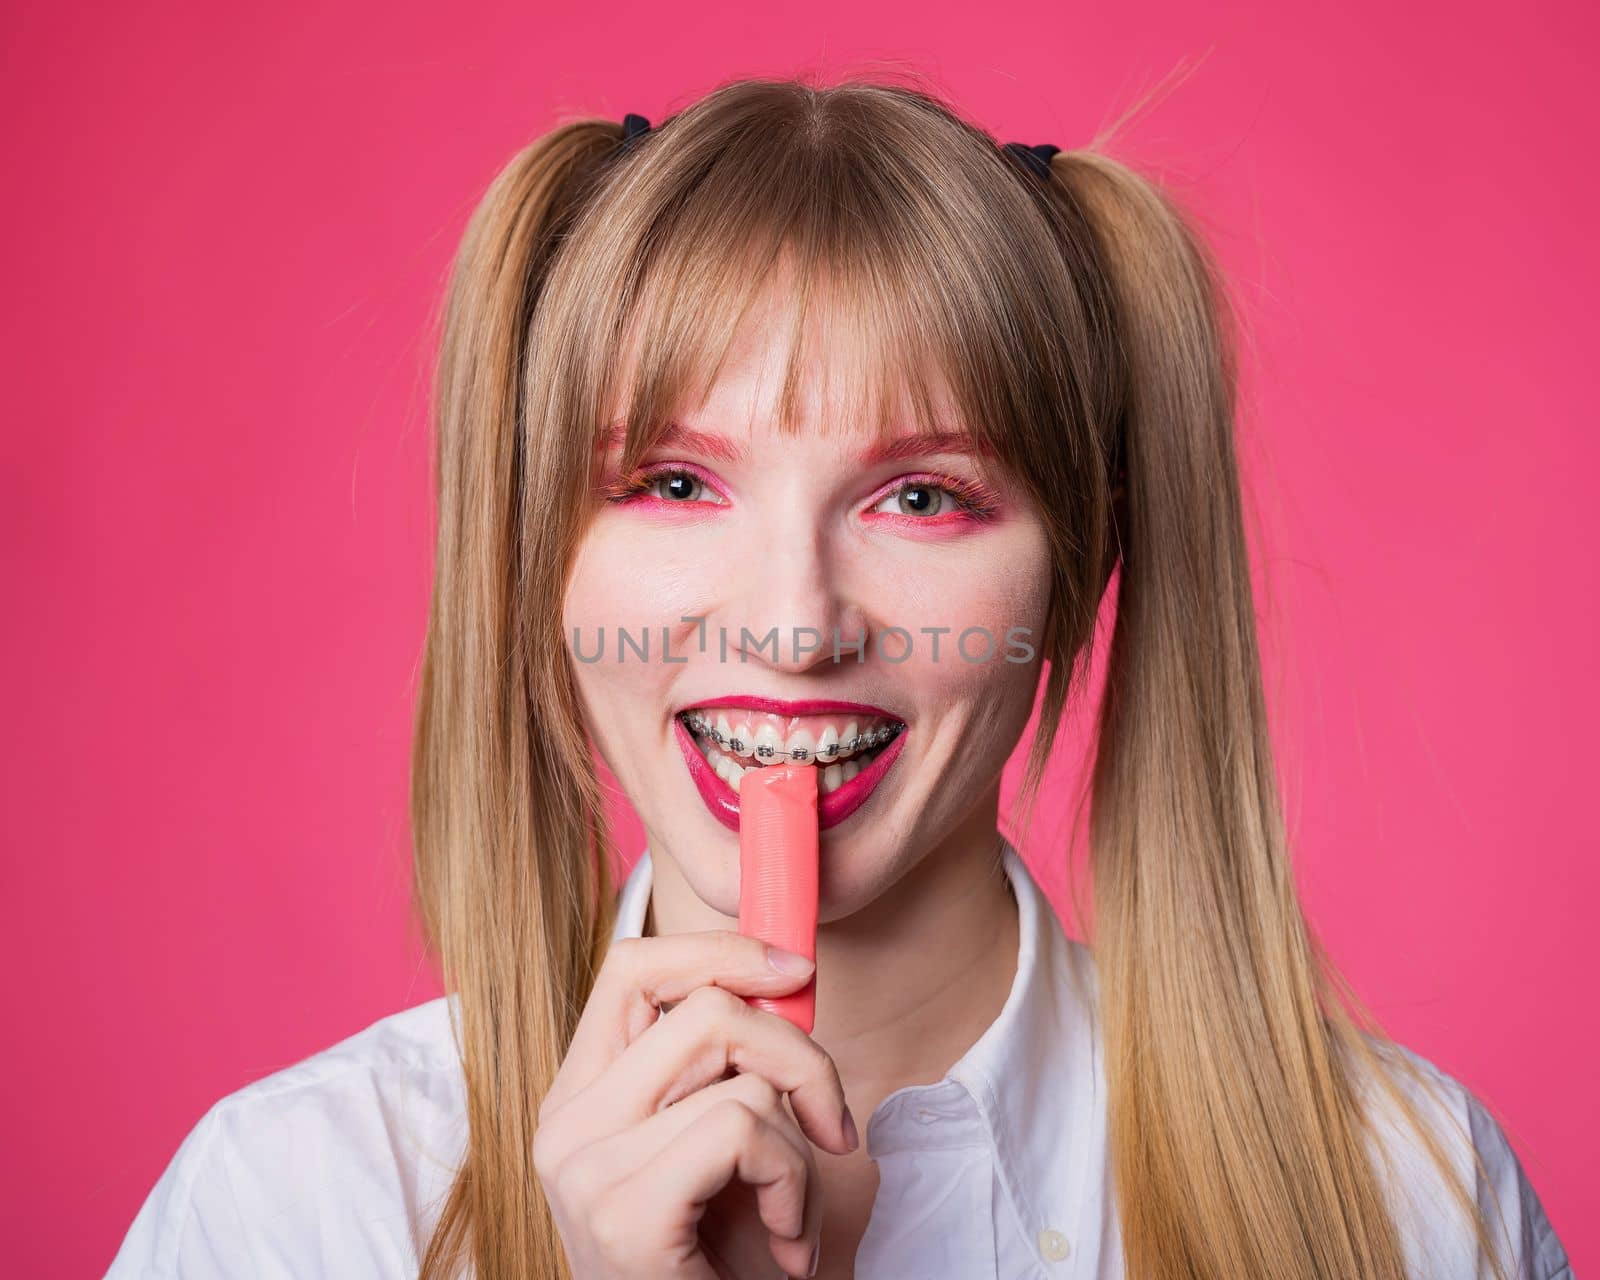 Portrait of a young woman with braces and bright makeup chewing gum on a pink background. by mrwed54